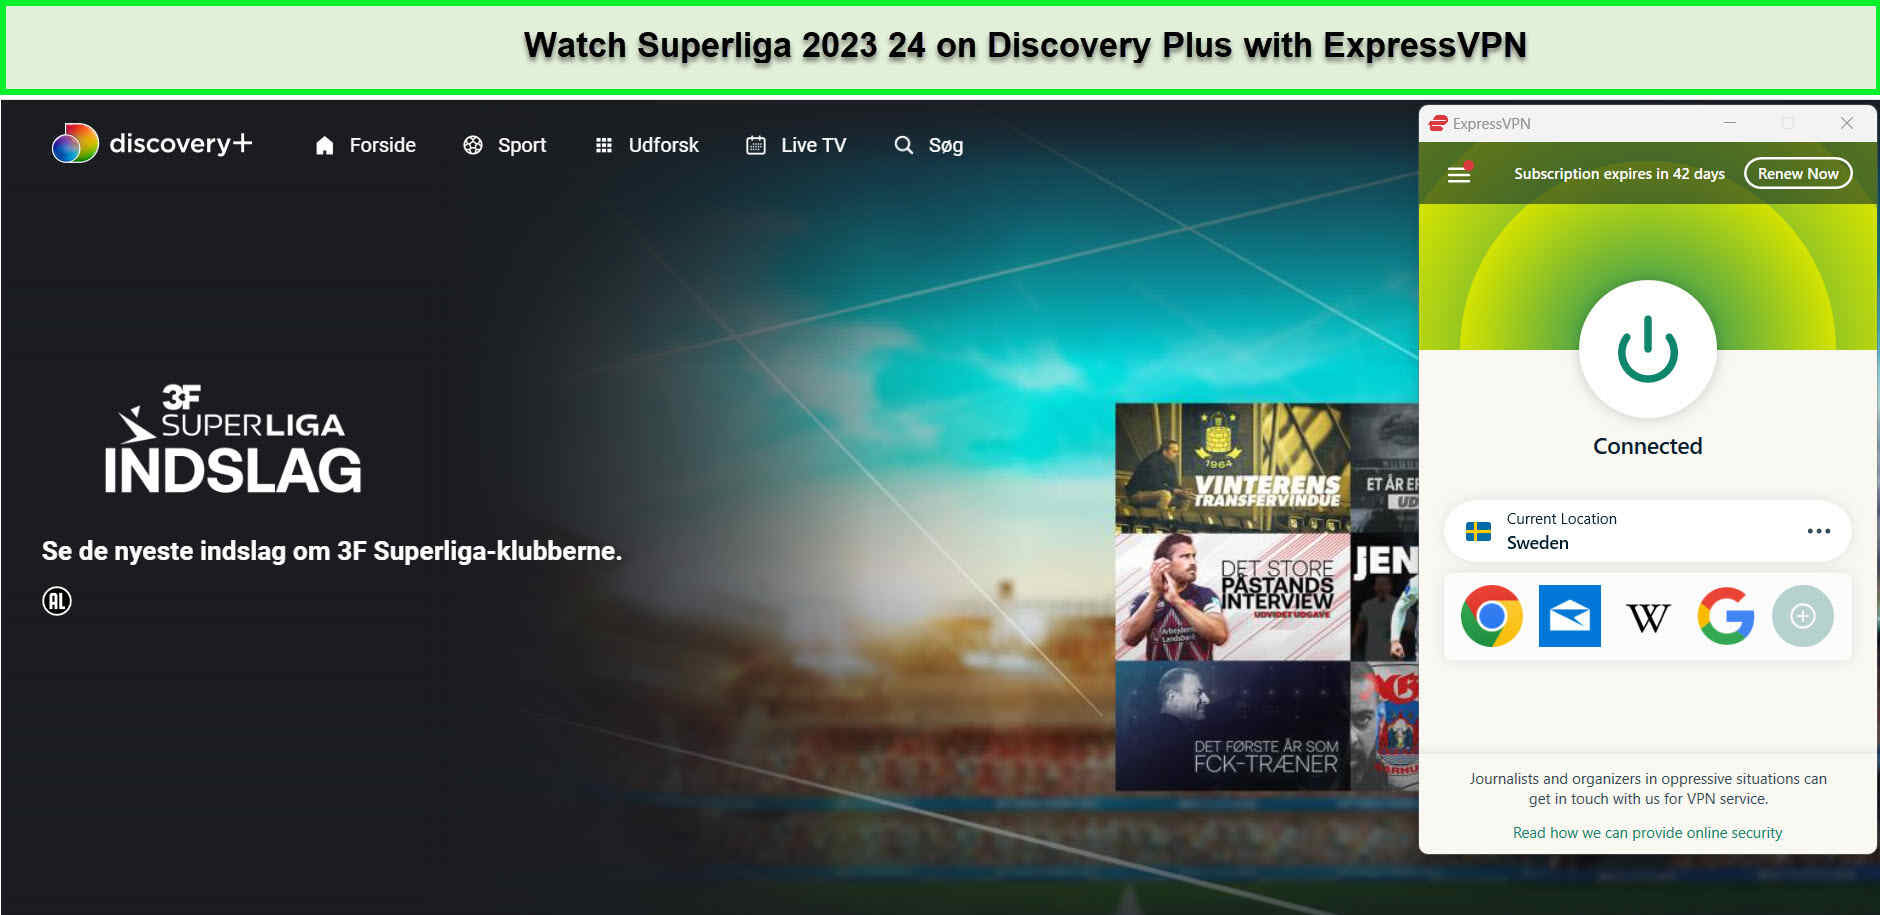 Watch-Superliga-2023-24-in-USA-on-Discovery-Plus-with-ExpressVPN!